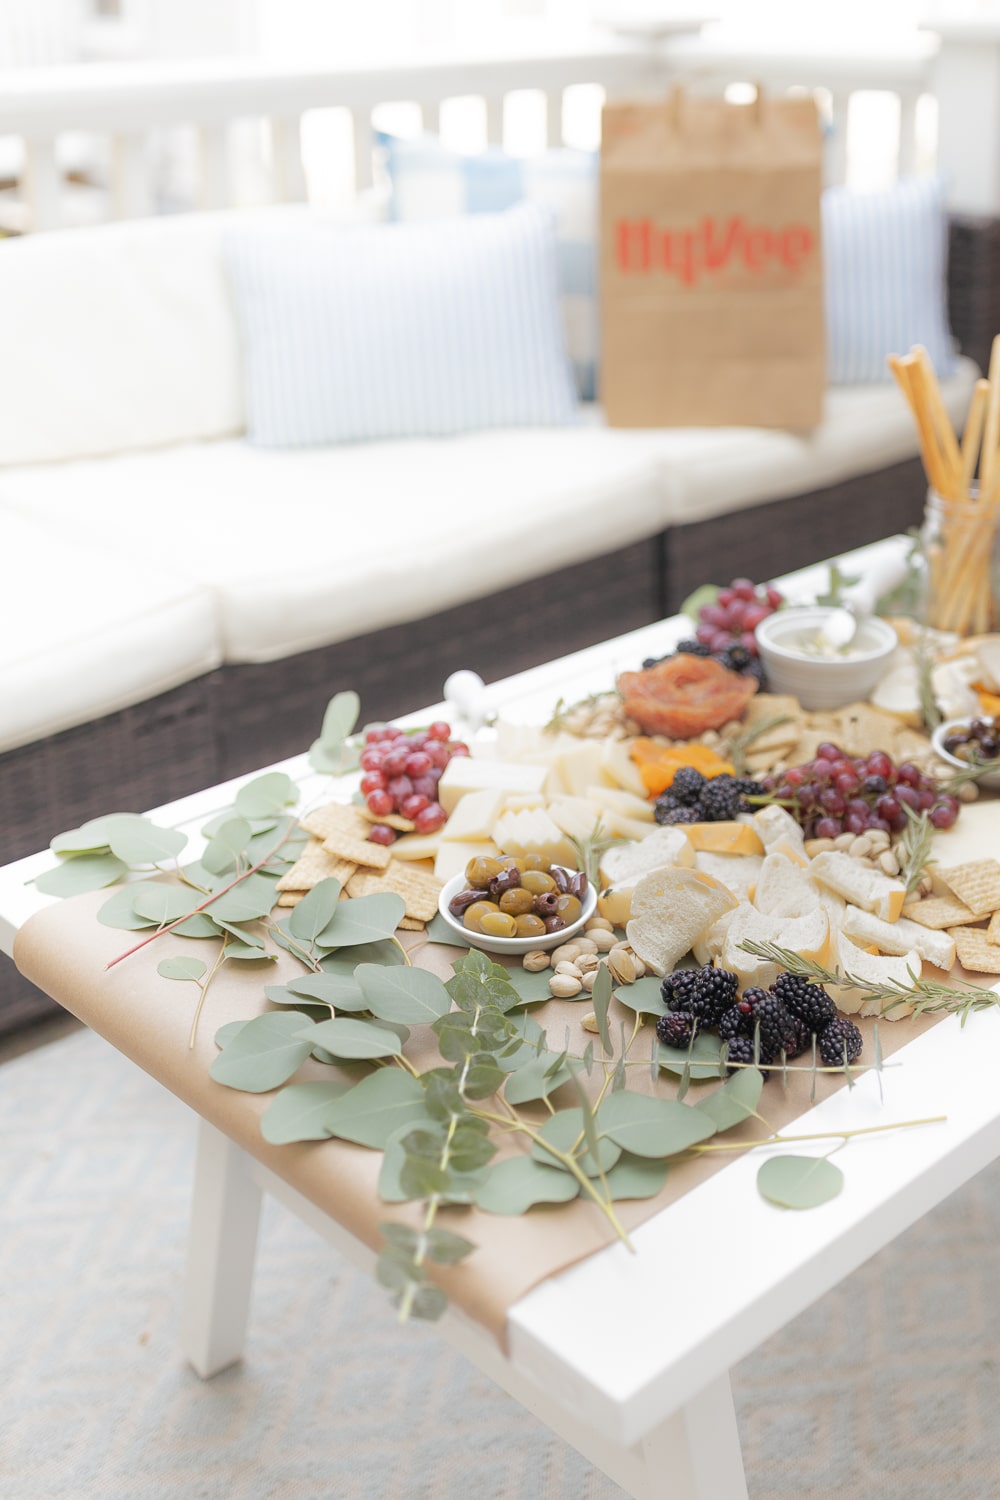 Affordable fall grazing board ideas from blogger Stephanie Ziajka on Diary of a Debutante